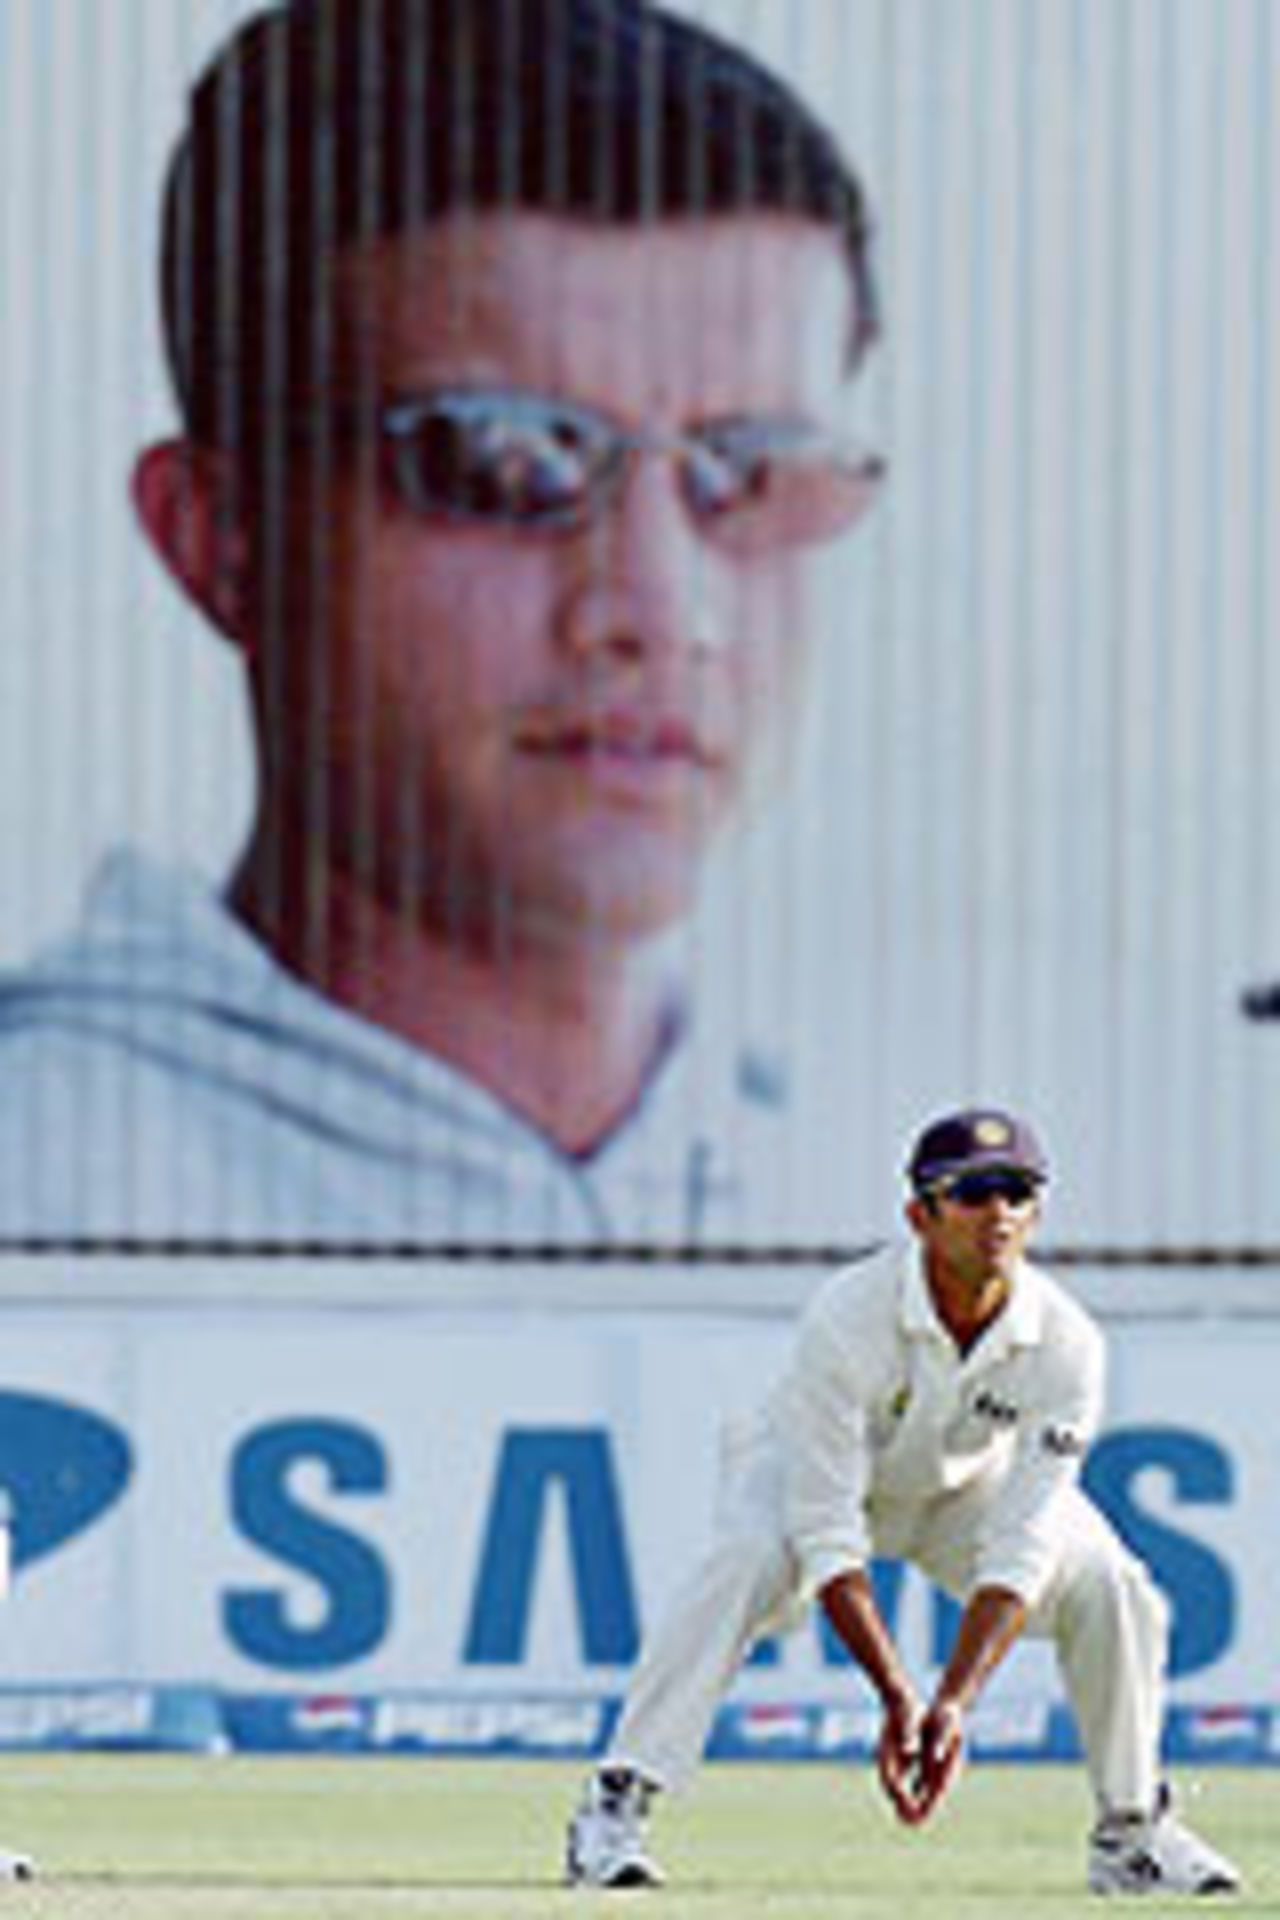 Rahul Dravid fields in the backdrop of a hoarding with Sourav Ganguly's face on it, Pakistan v India, 1st Test, Multan, 3rd day, March 30, 2004